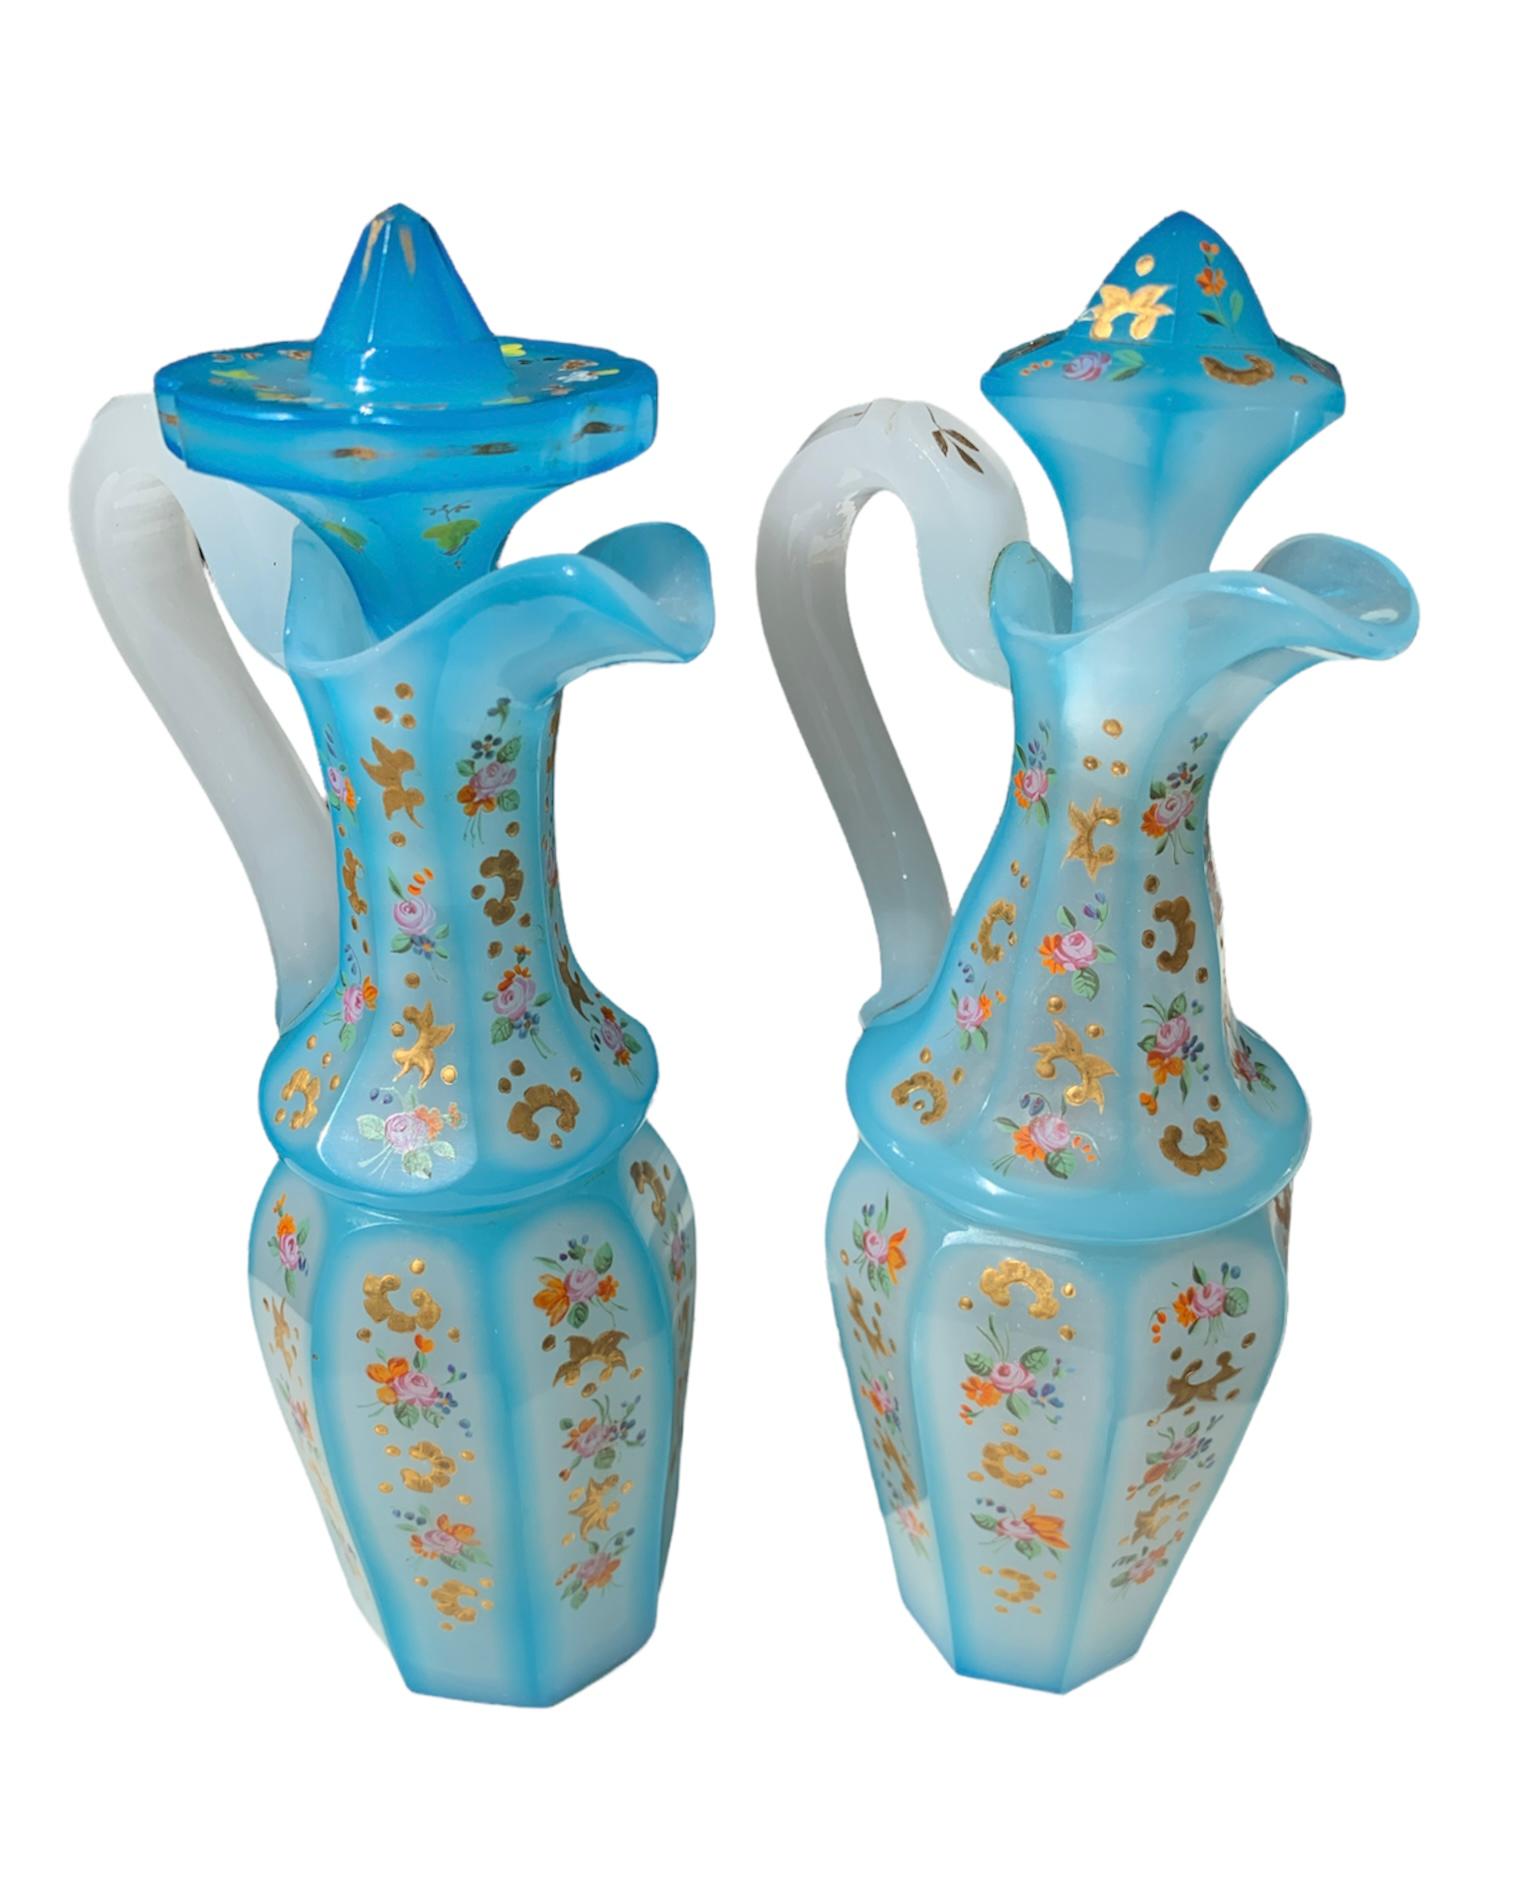 Charles X Antique Pair of Bohemian Enameled Opaline Glass Ptichers, 19th Century